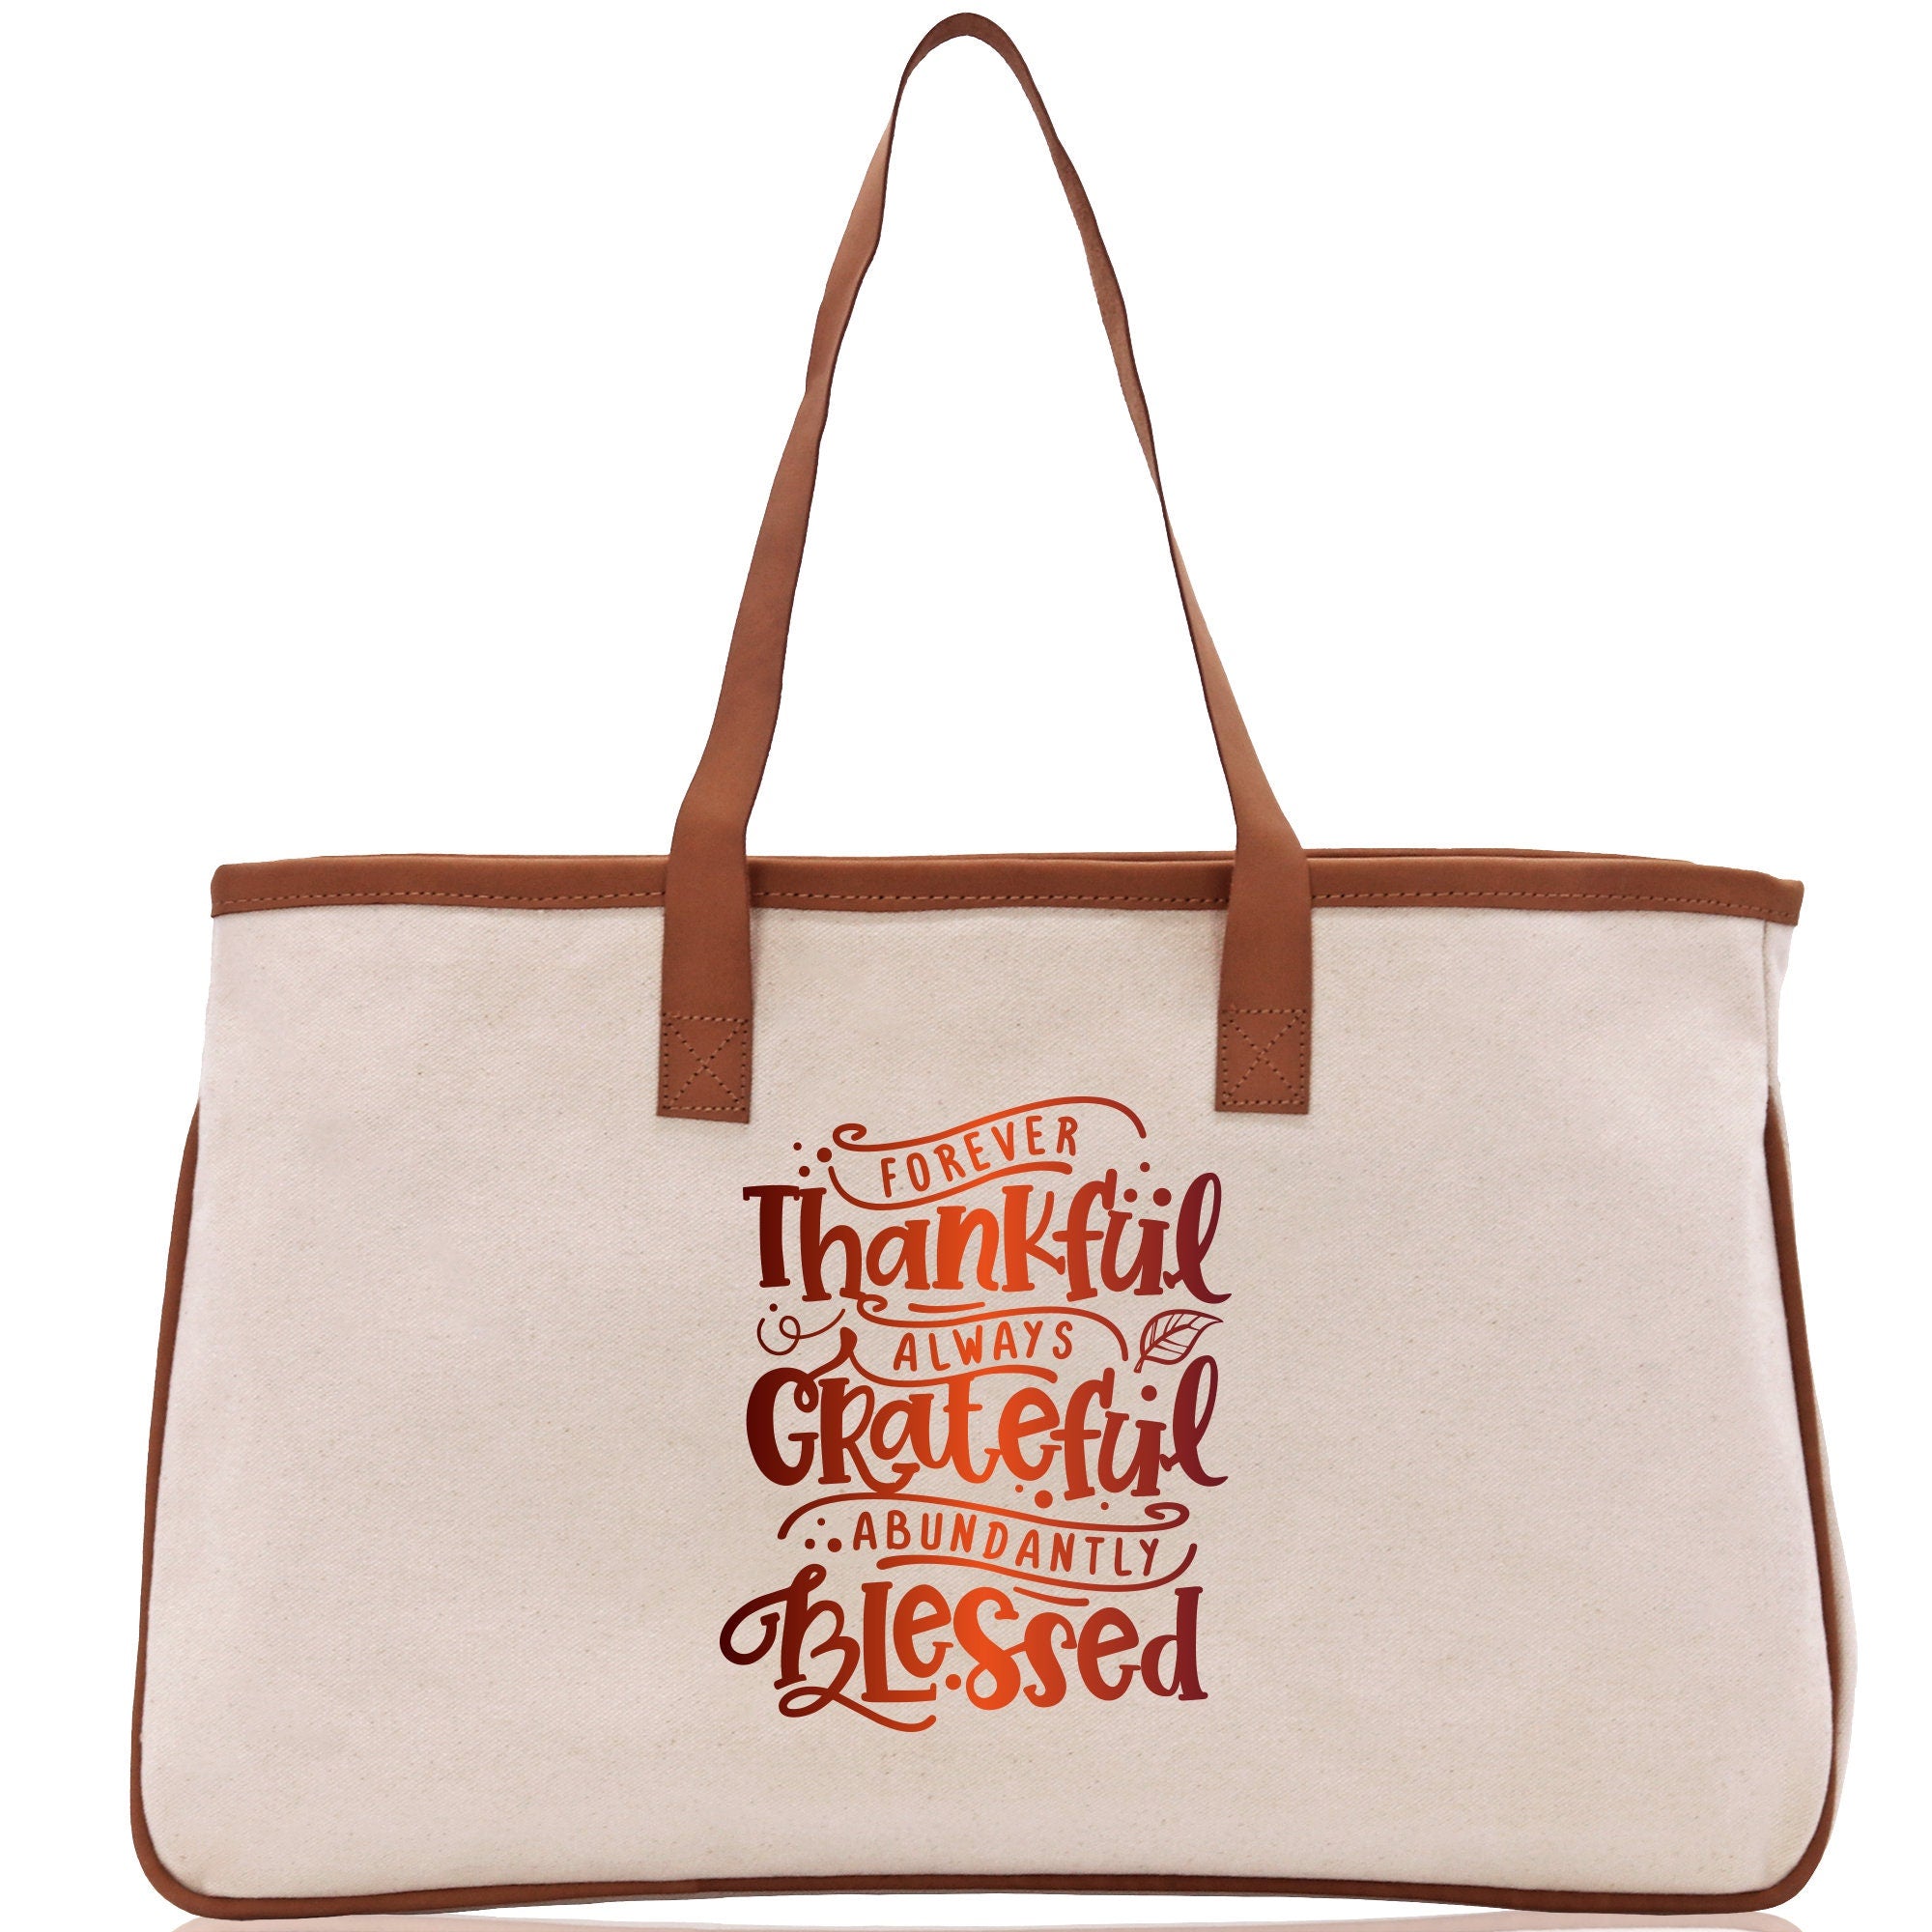 Thankful Grateful Blessed Cotton Canvas Tote Bag Thanksgiving Bag Autumn Fall Vibes Bag Motivational Bag Blessed Bag Fall Market Grocery Bag